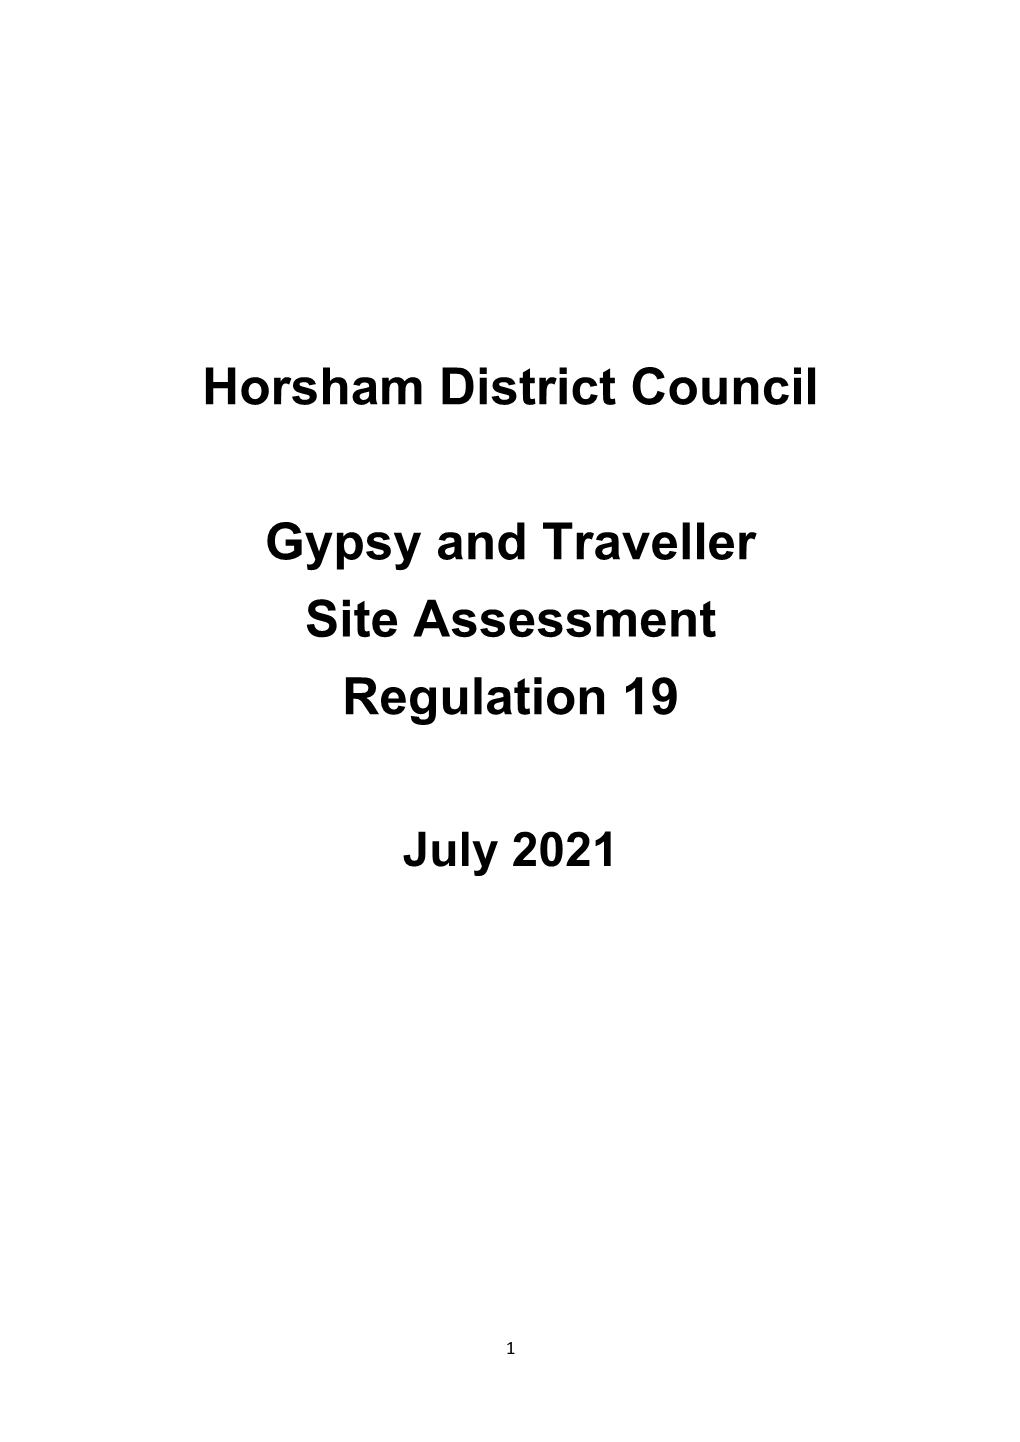 Horsham District Council Gypsy and Traveller Site Assessment